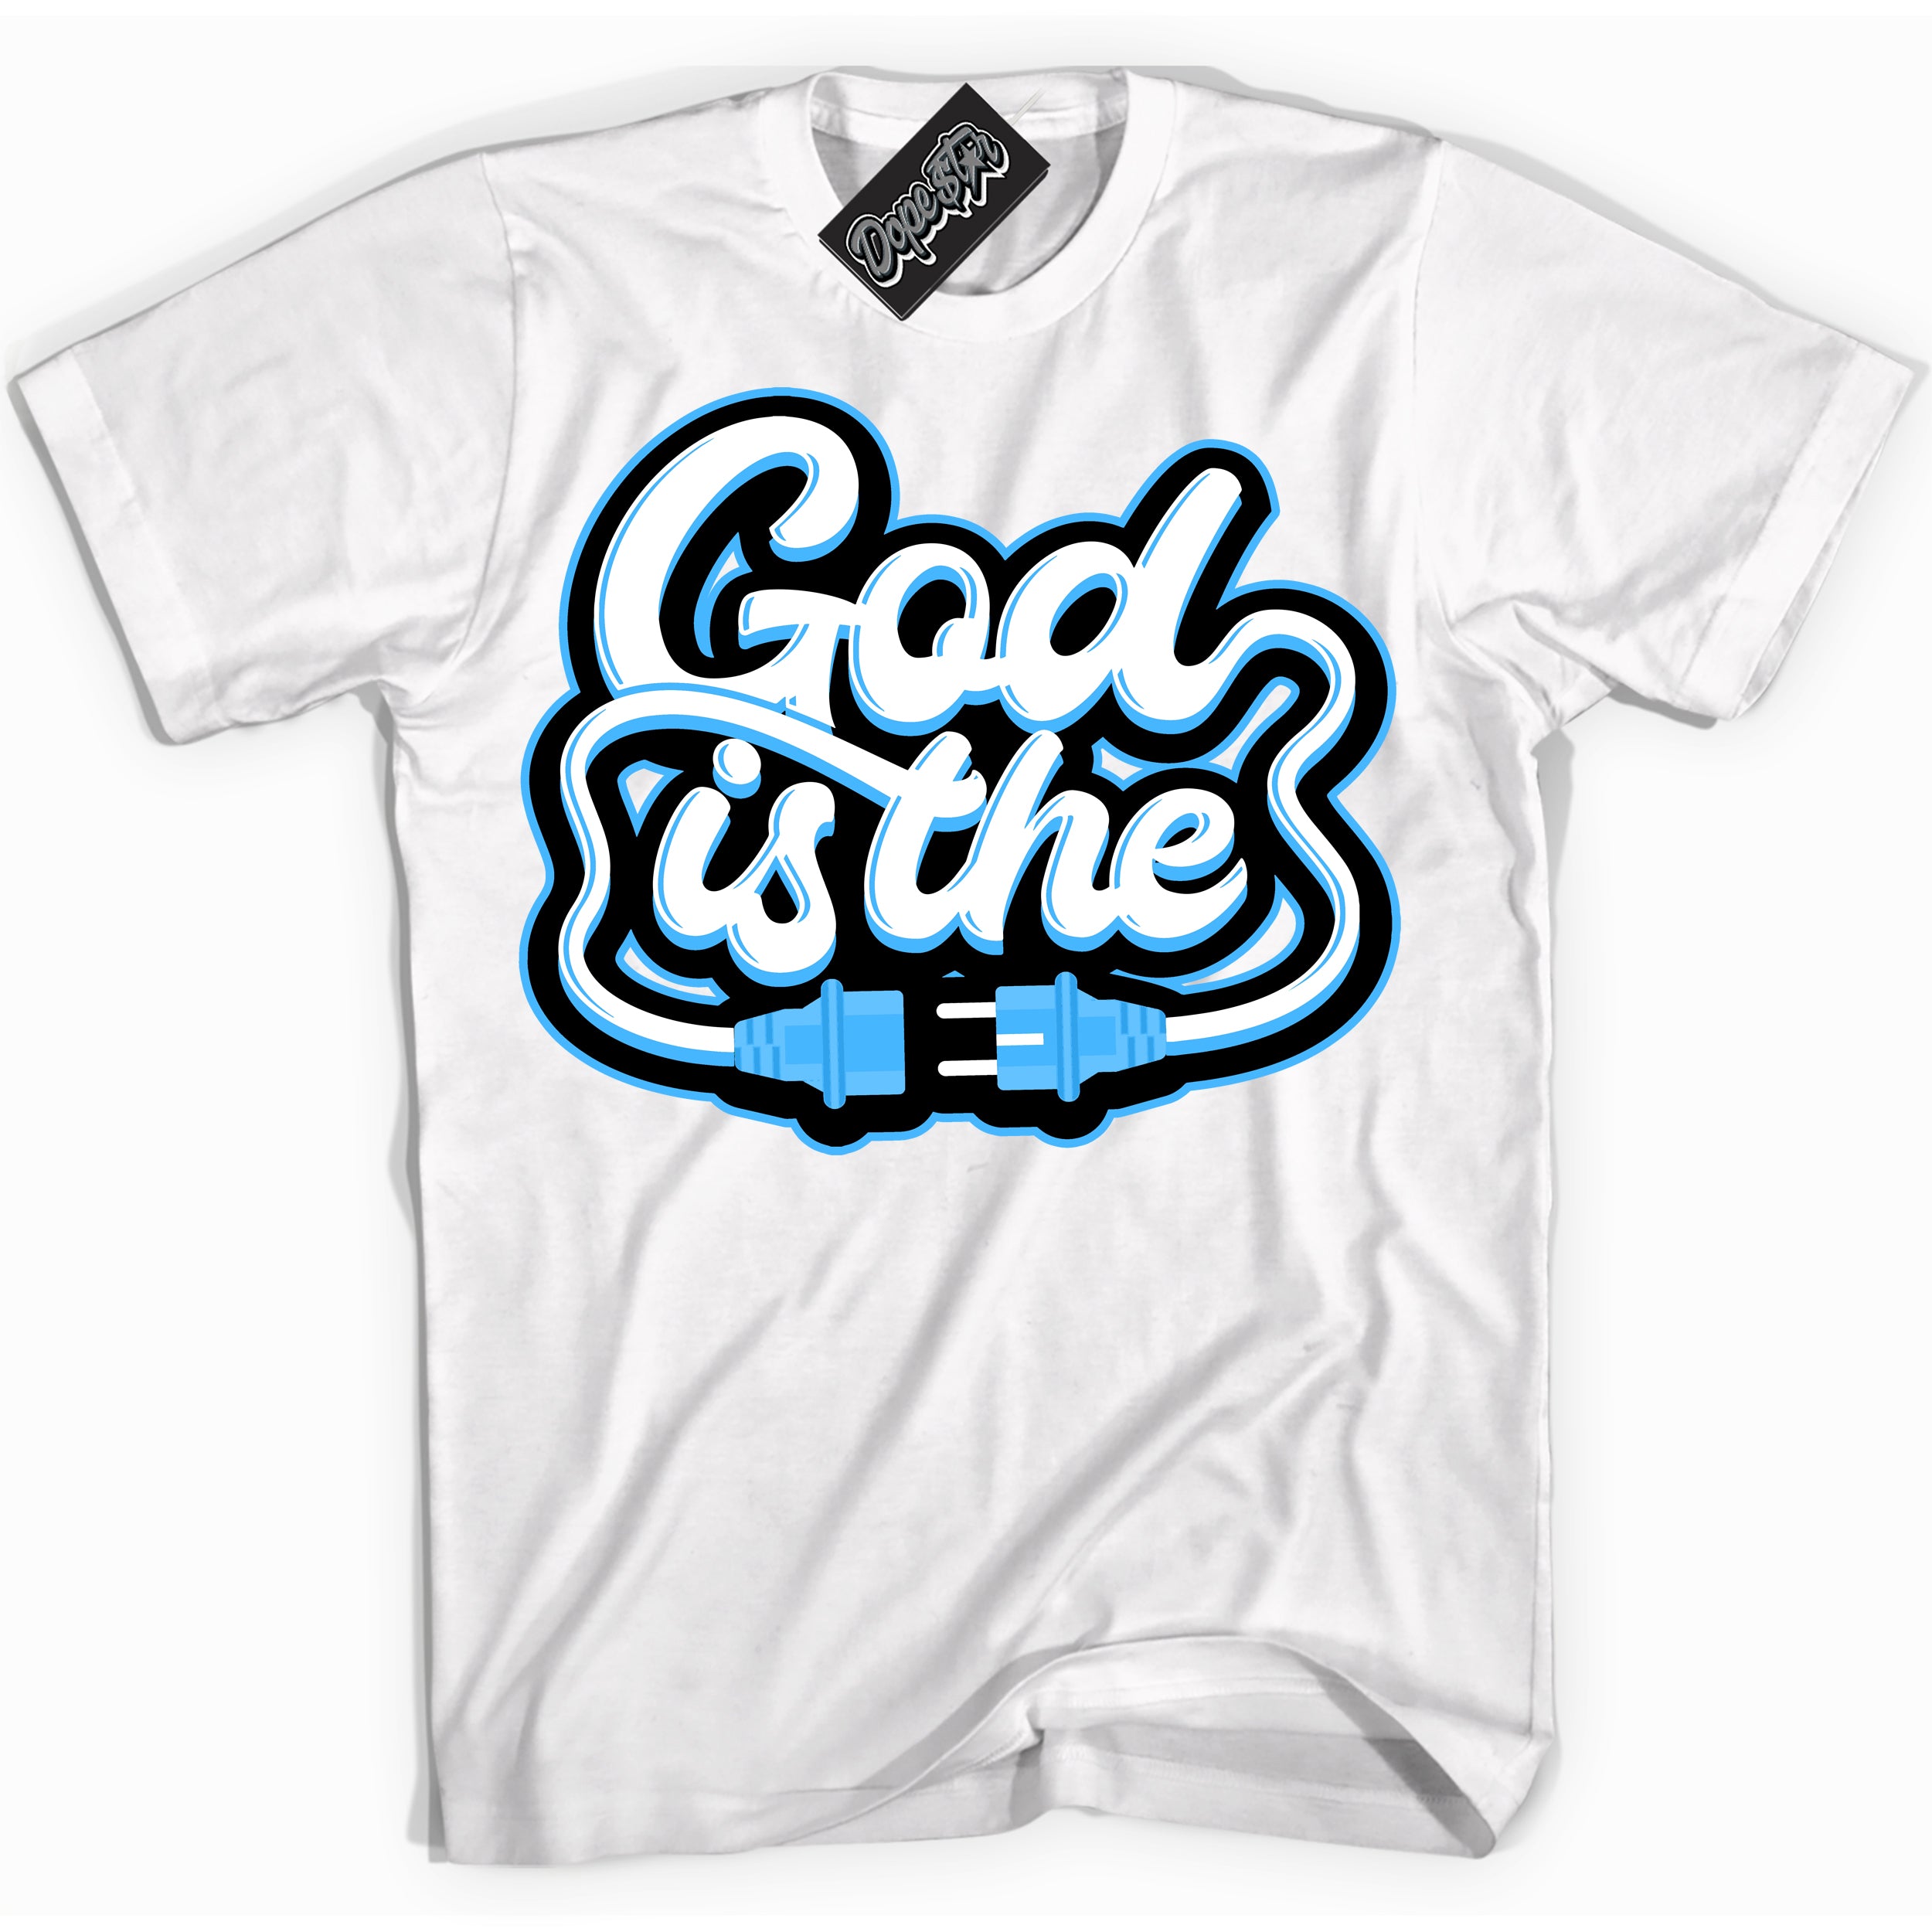 Cool White graphic tee with “ God Is The ” design, that perfectly matches Powder Blue 9s sneakers 